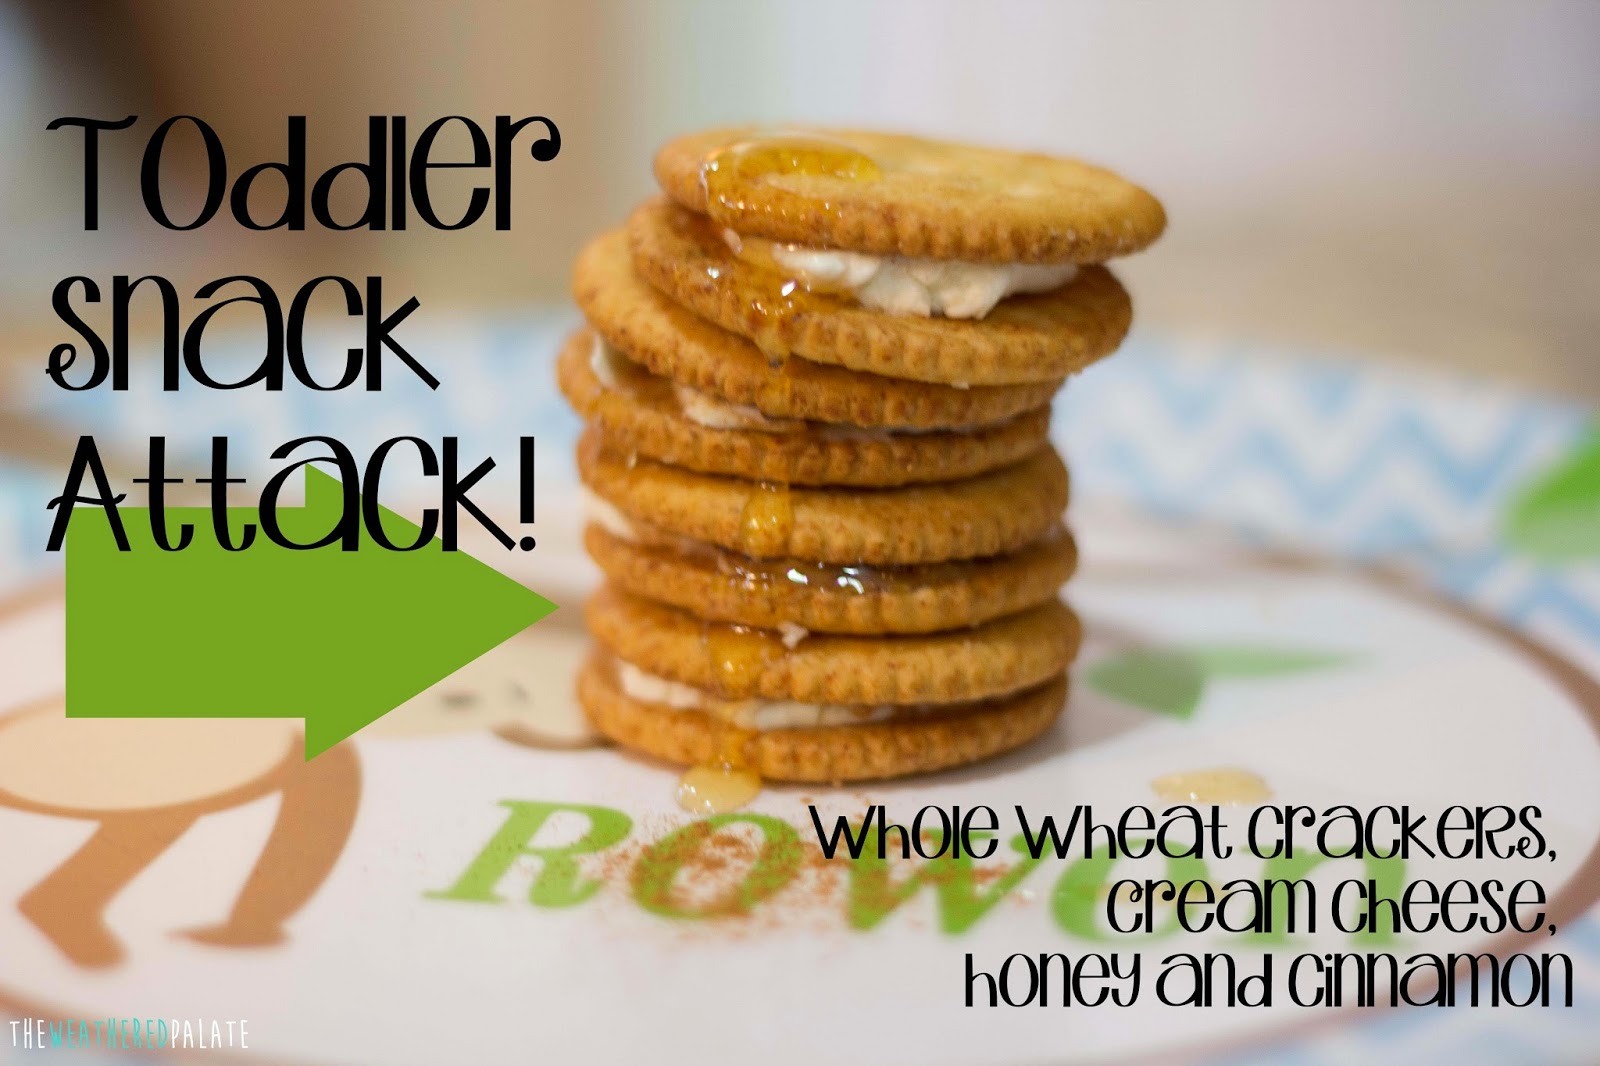 http://www.theweatheredpalate.com/2014/09/toddler-snack-attack.html